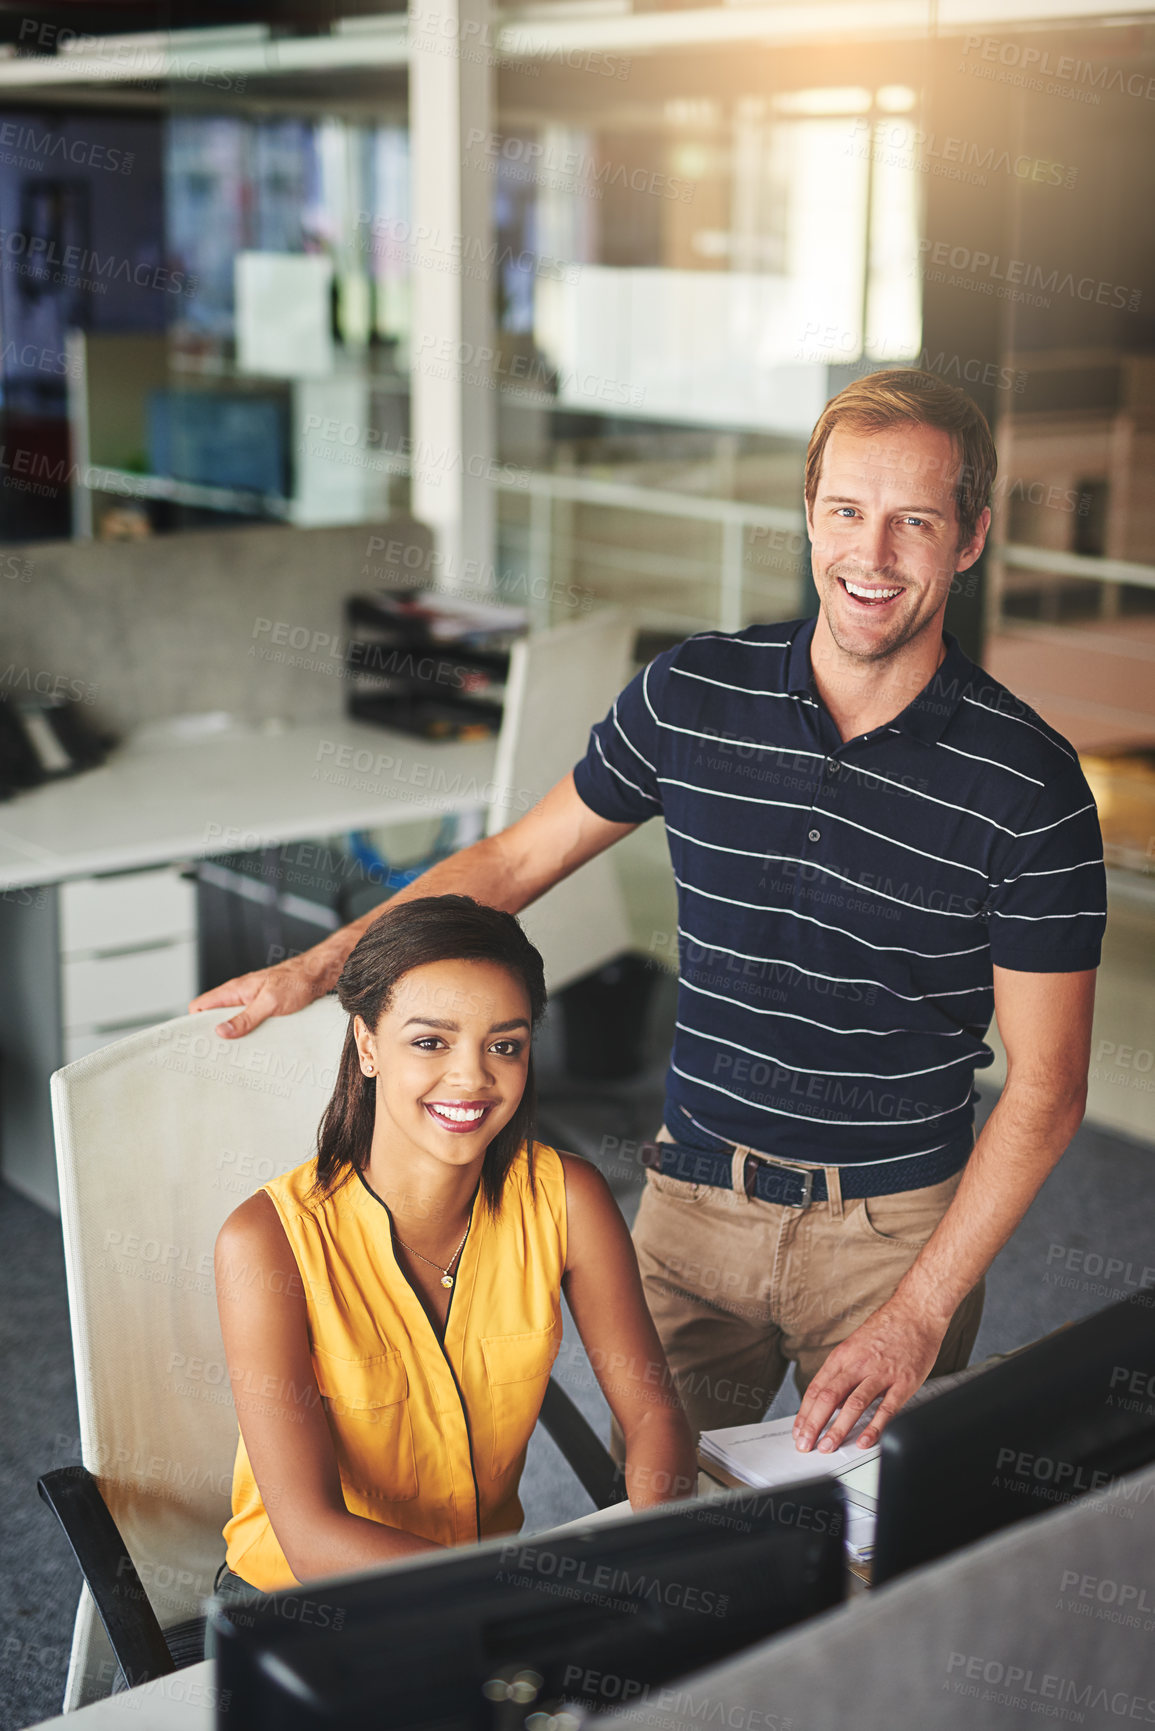 Buy stock photo Portrait of two smiling colleagues working together in an office